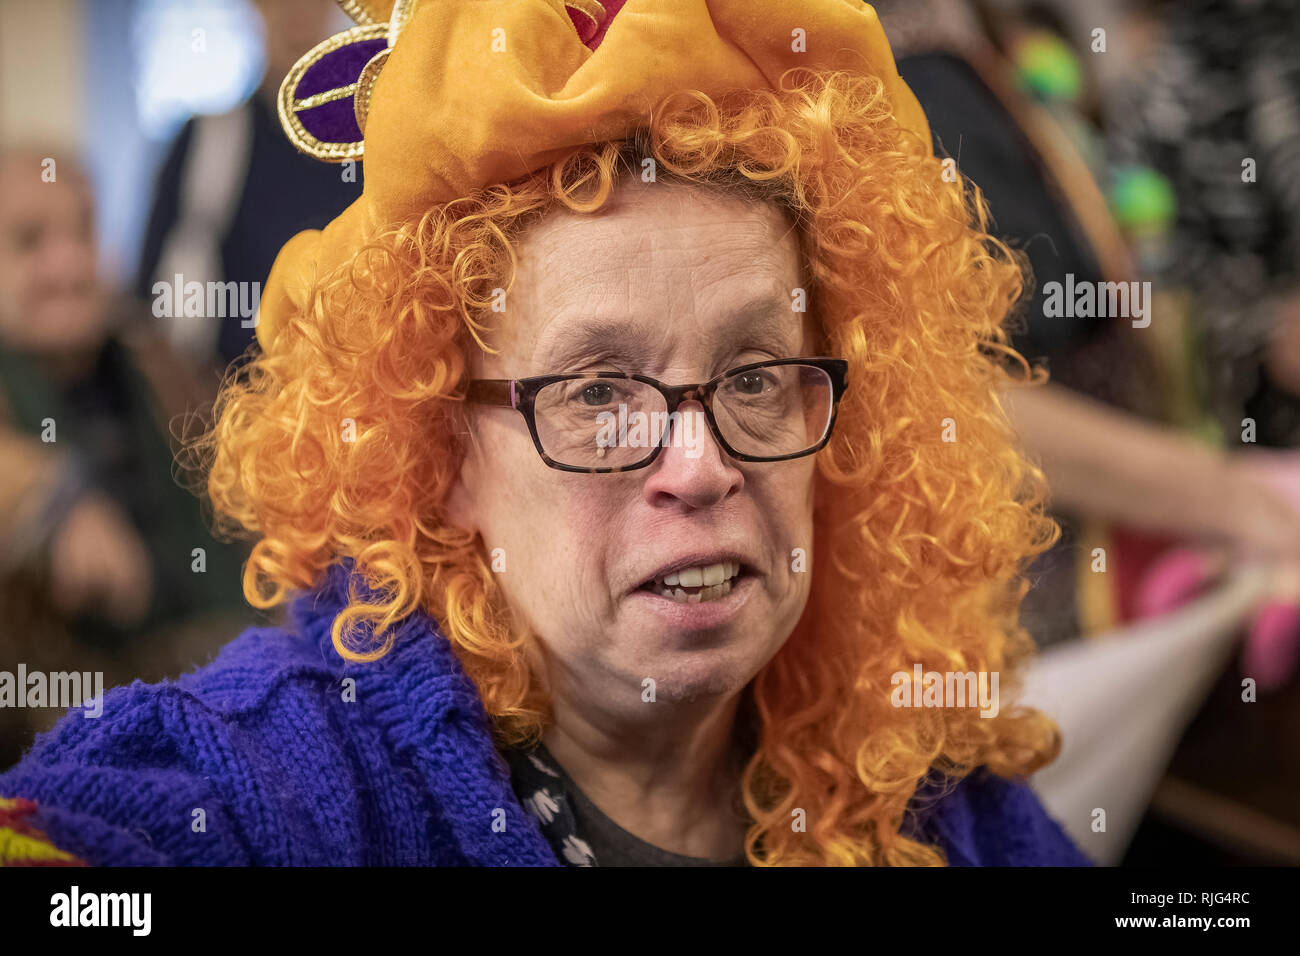 Female Clown with Ginger Hair Stock Photo